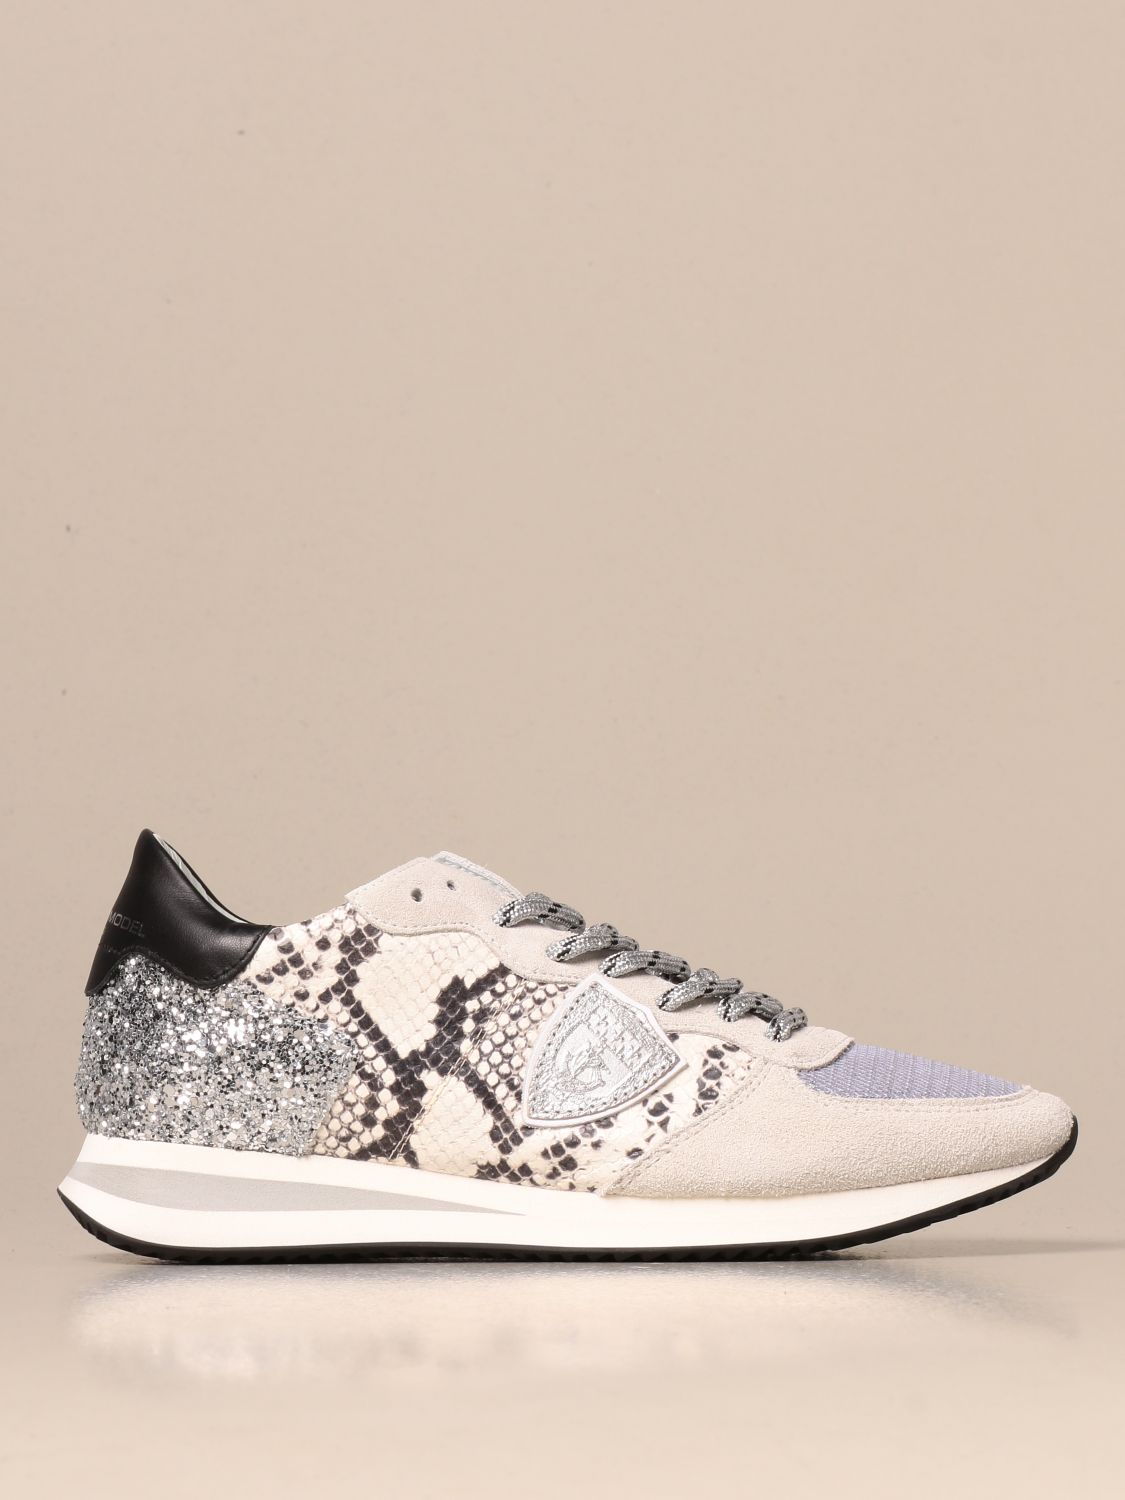 Tropez Philippe Model glitter sneakers in leather with python print